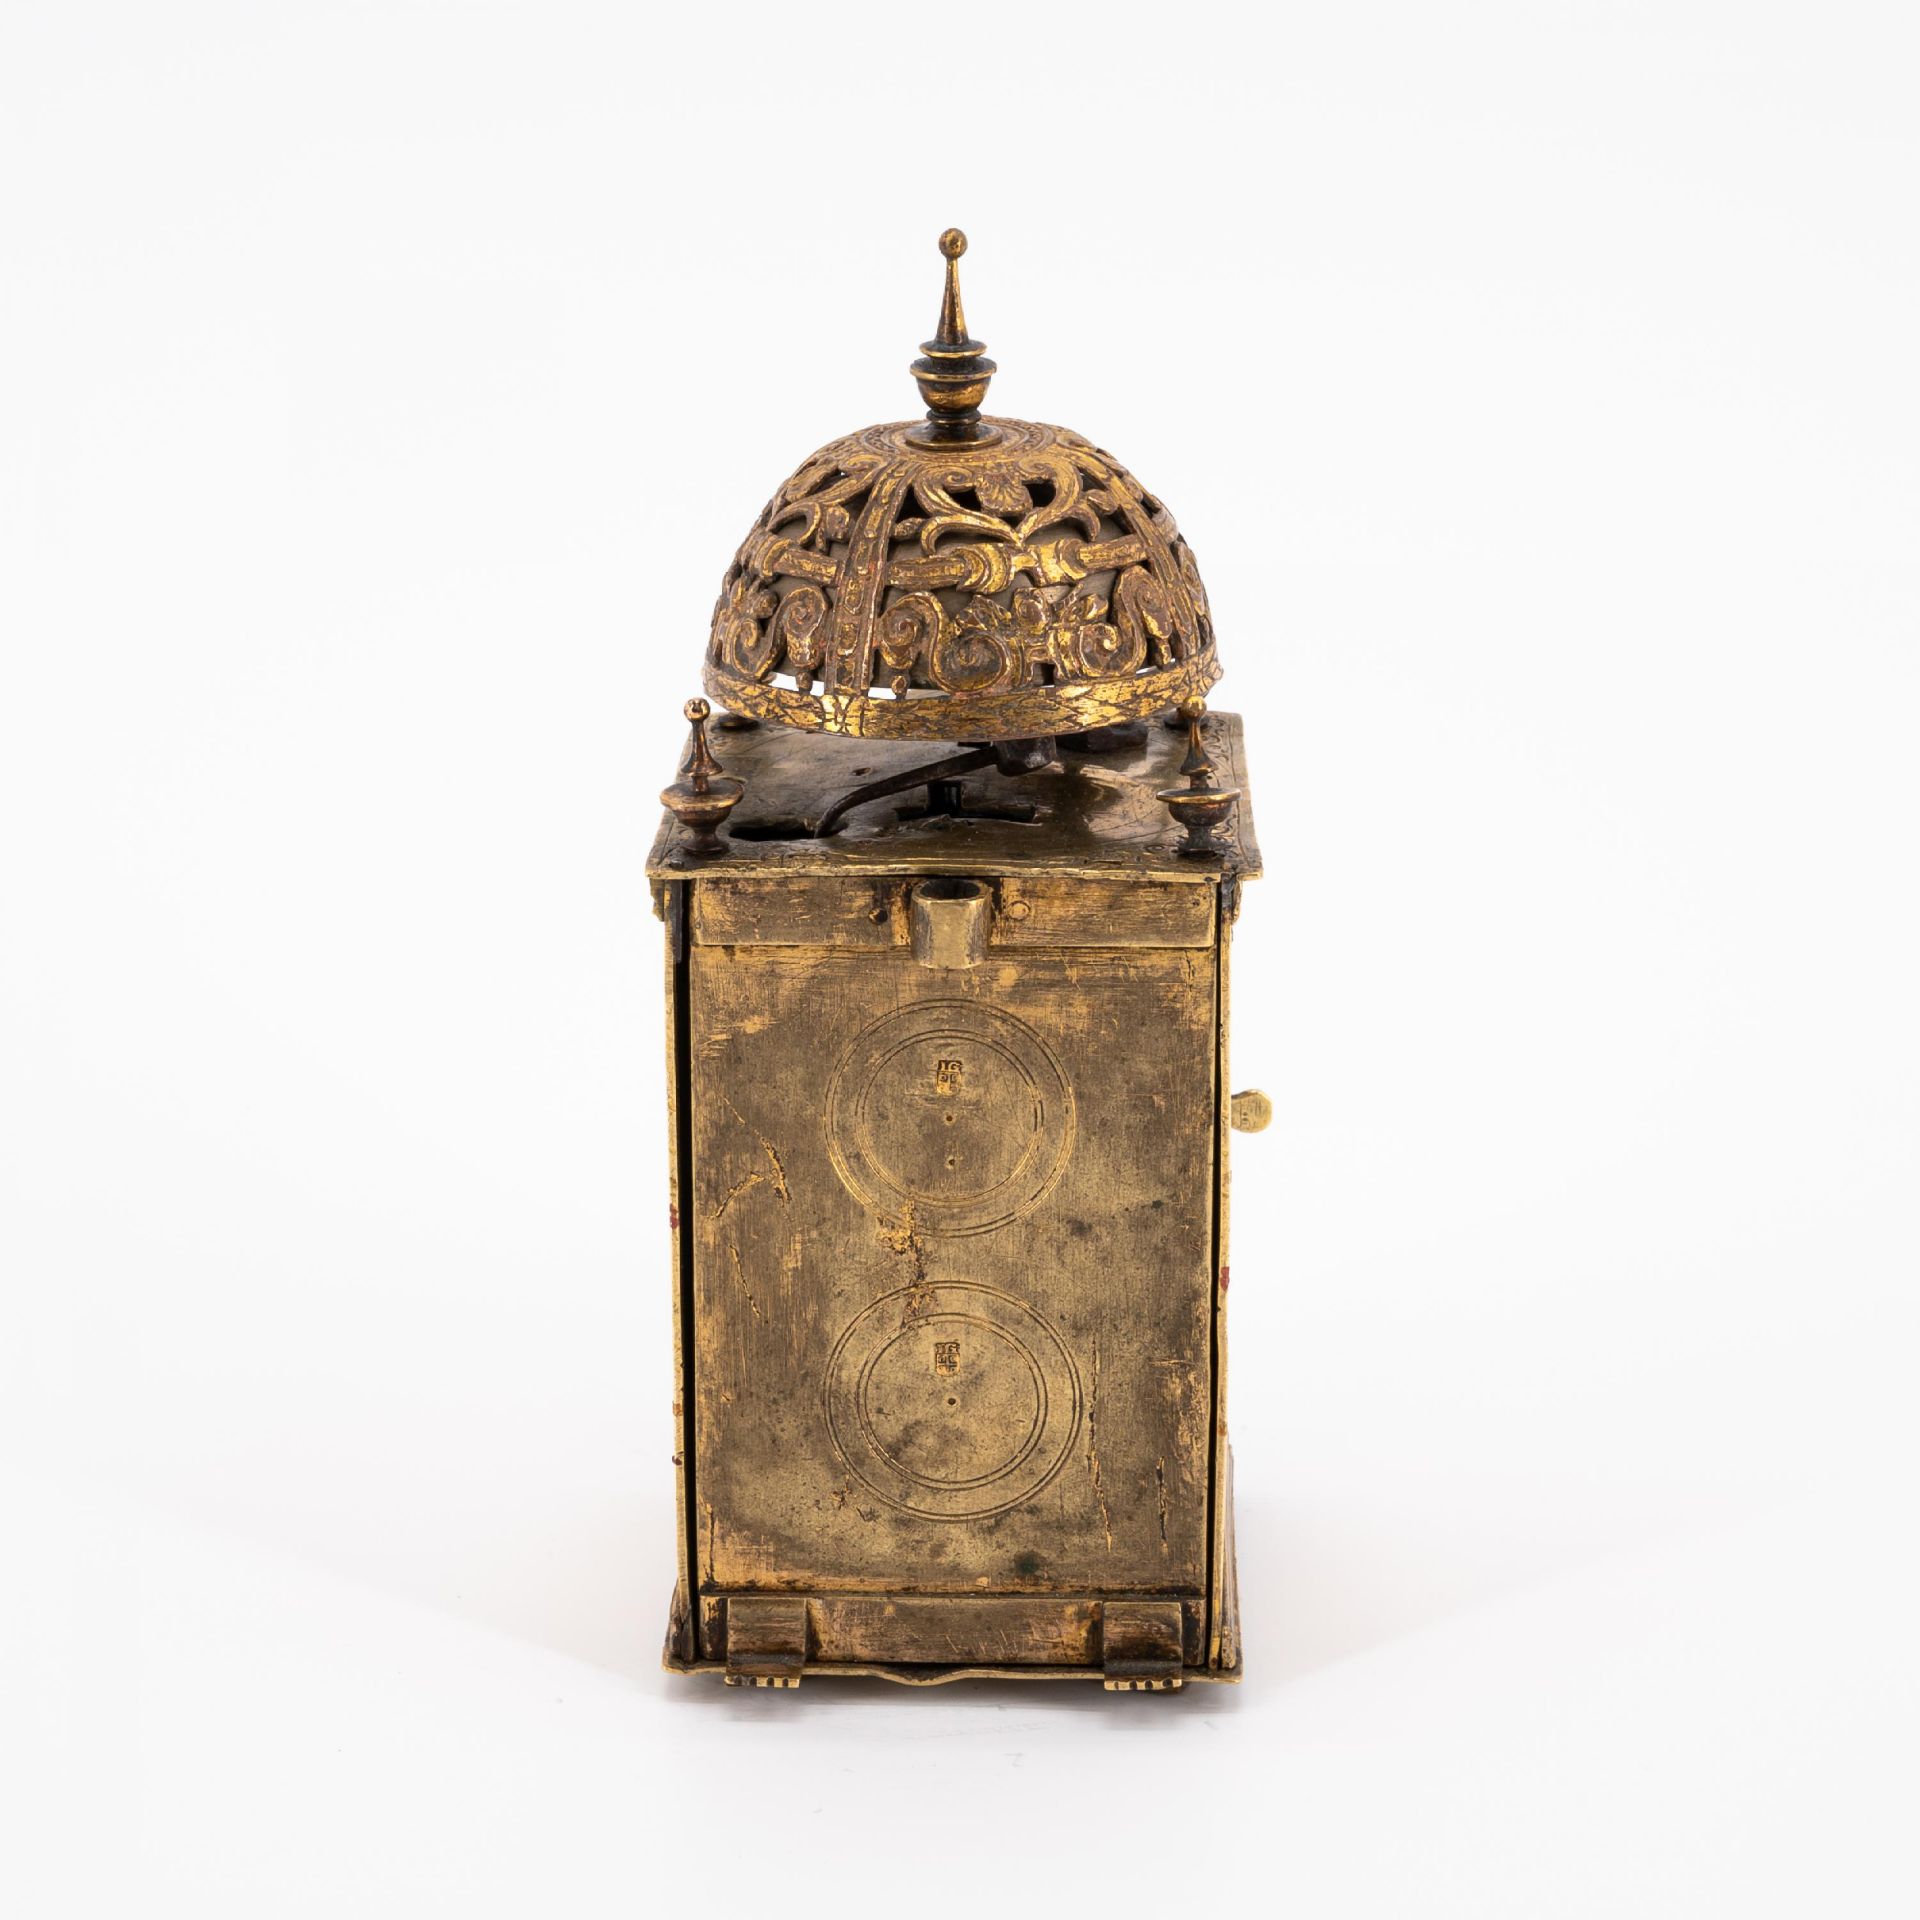 BRASS TABERNACLE CLOCK WITH FRONT ZAPPLER - Image 4 of 6